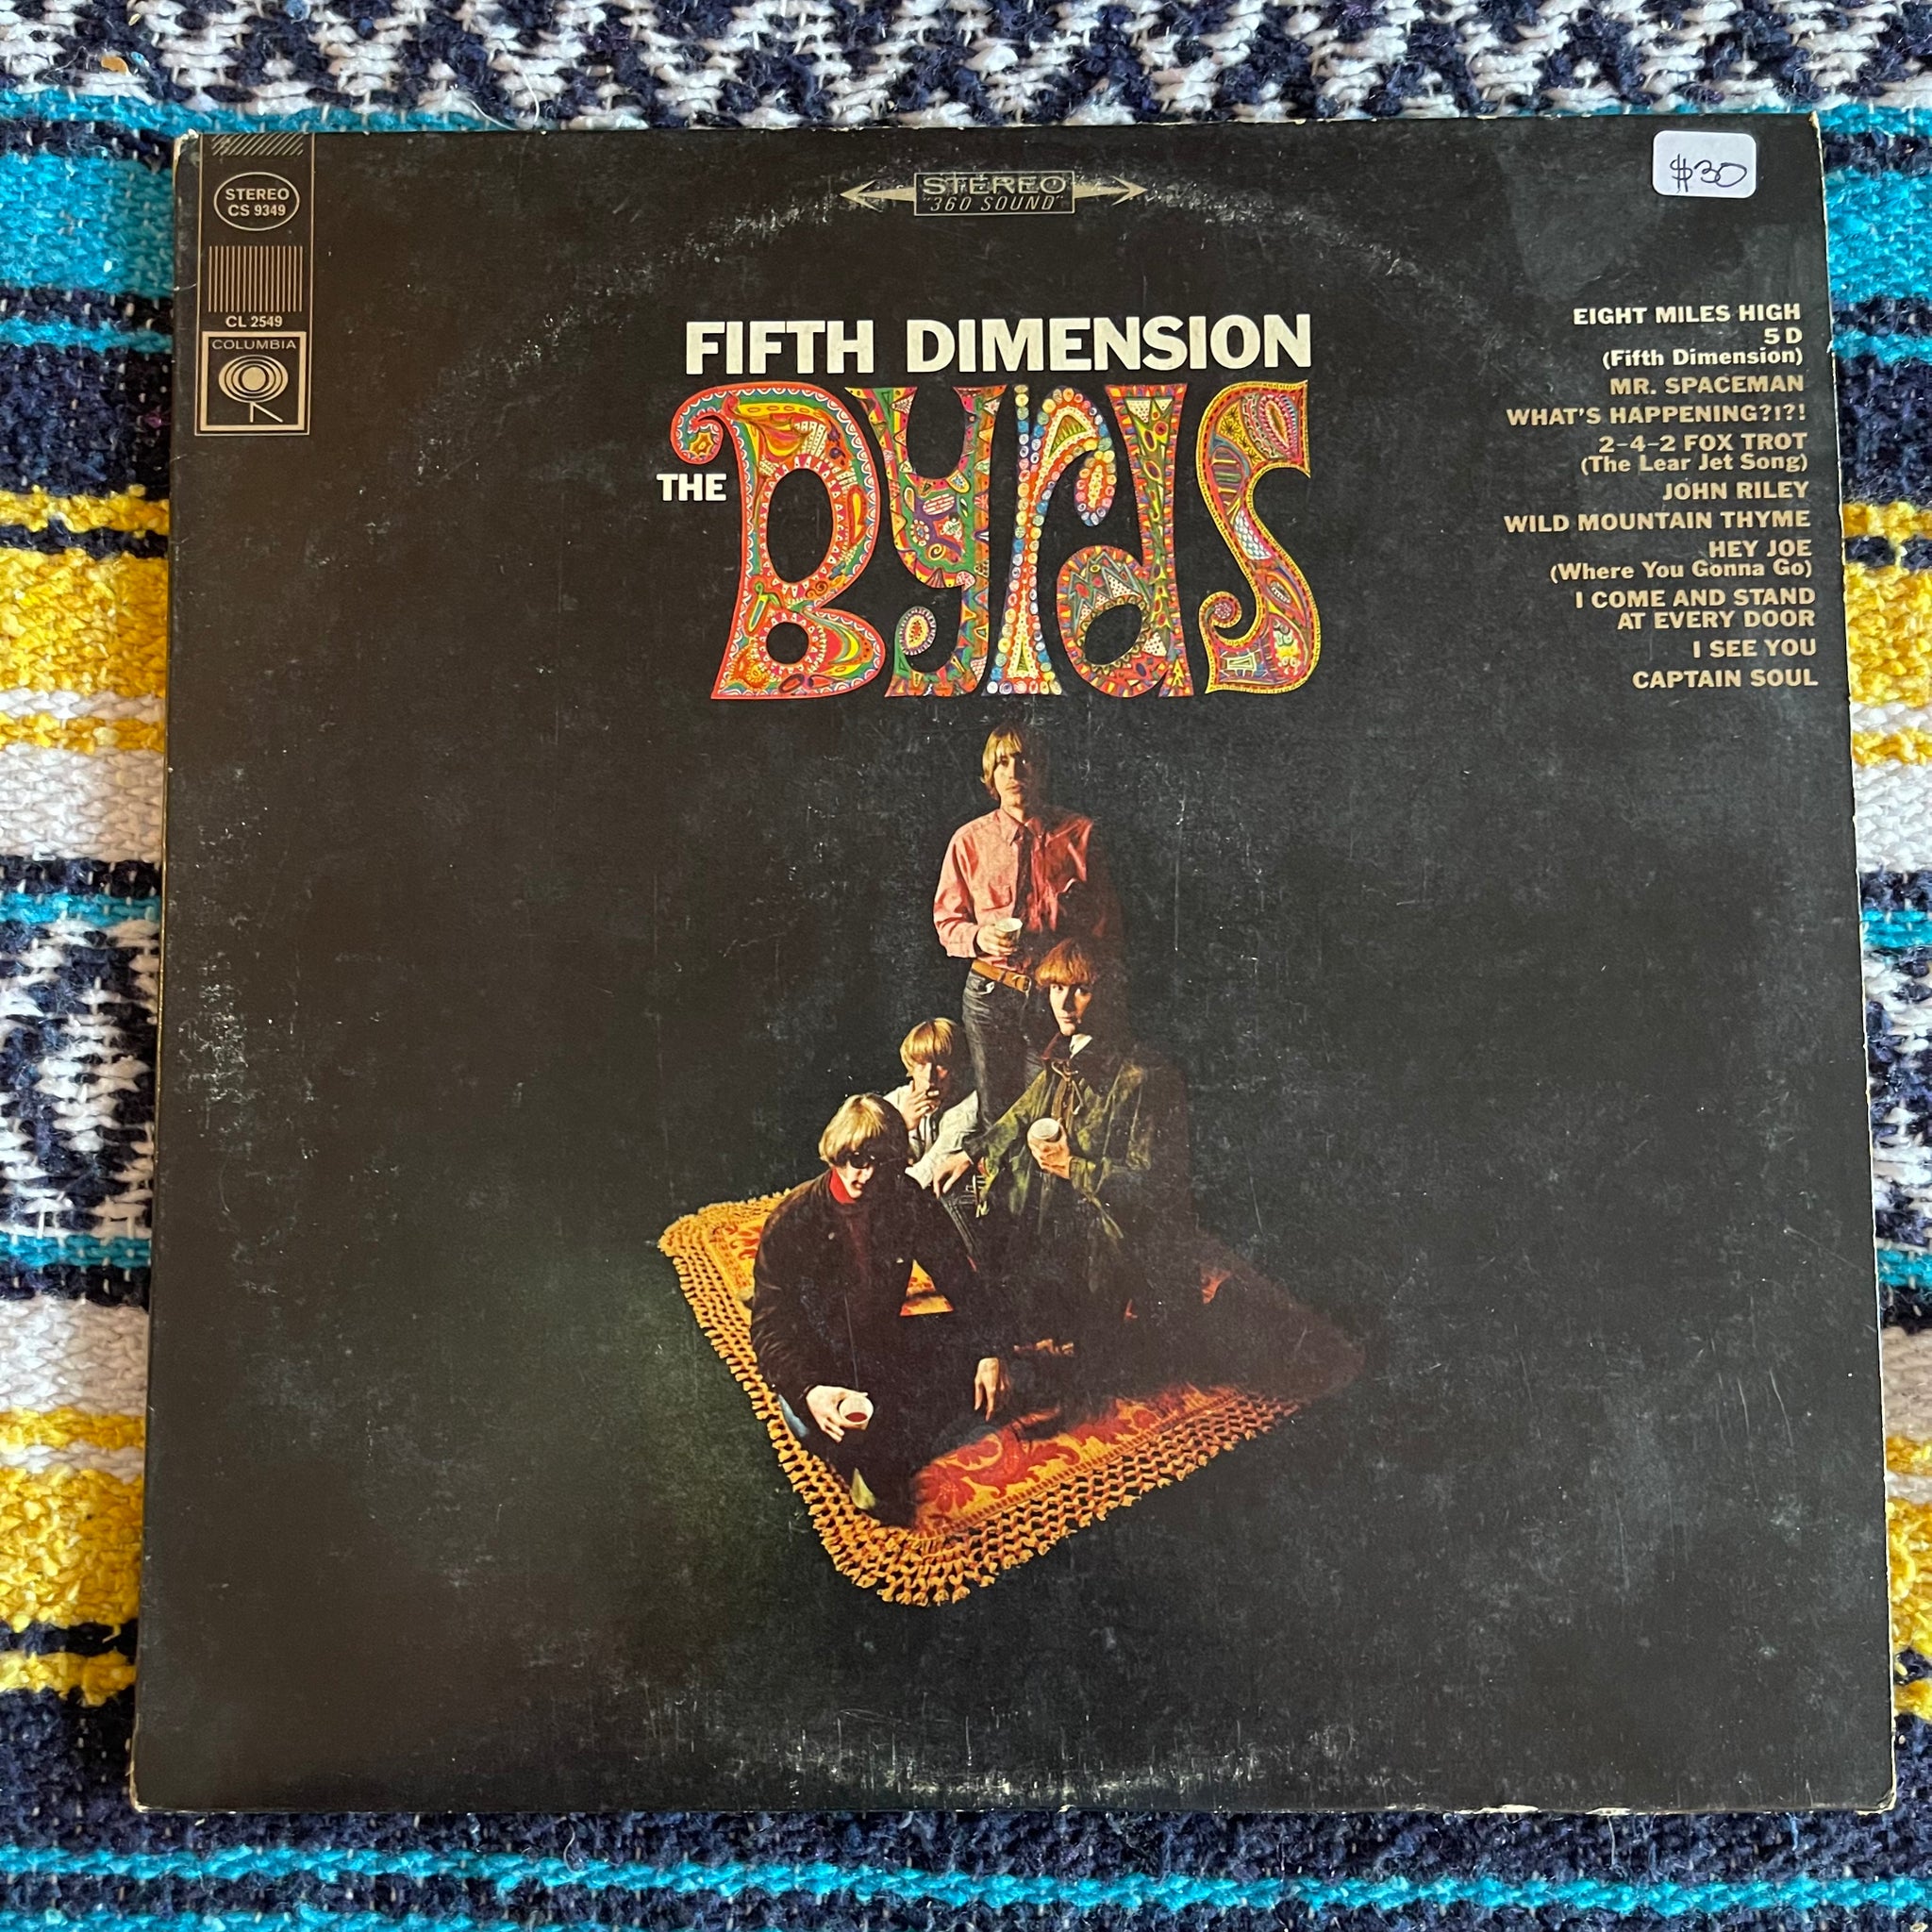 The Byrds-The Fifth Dimension